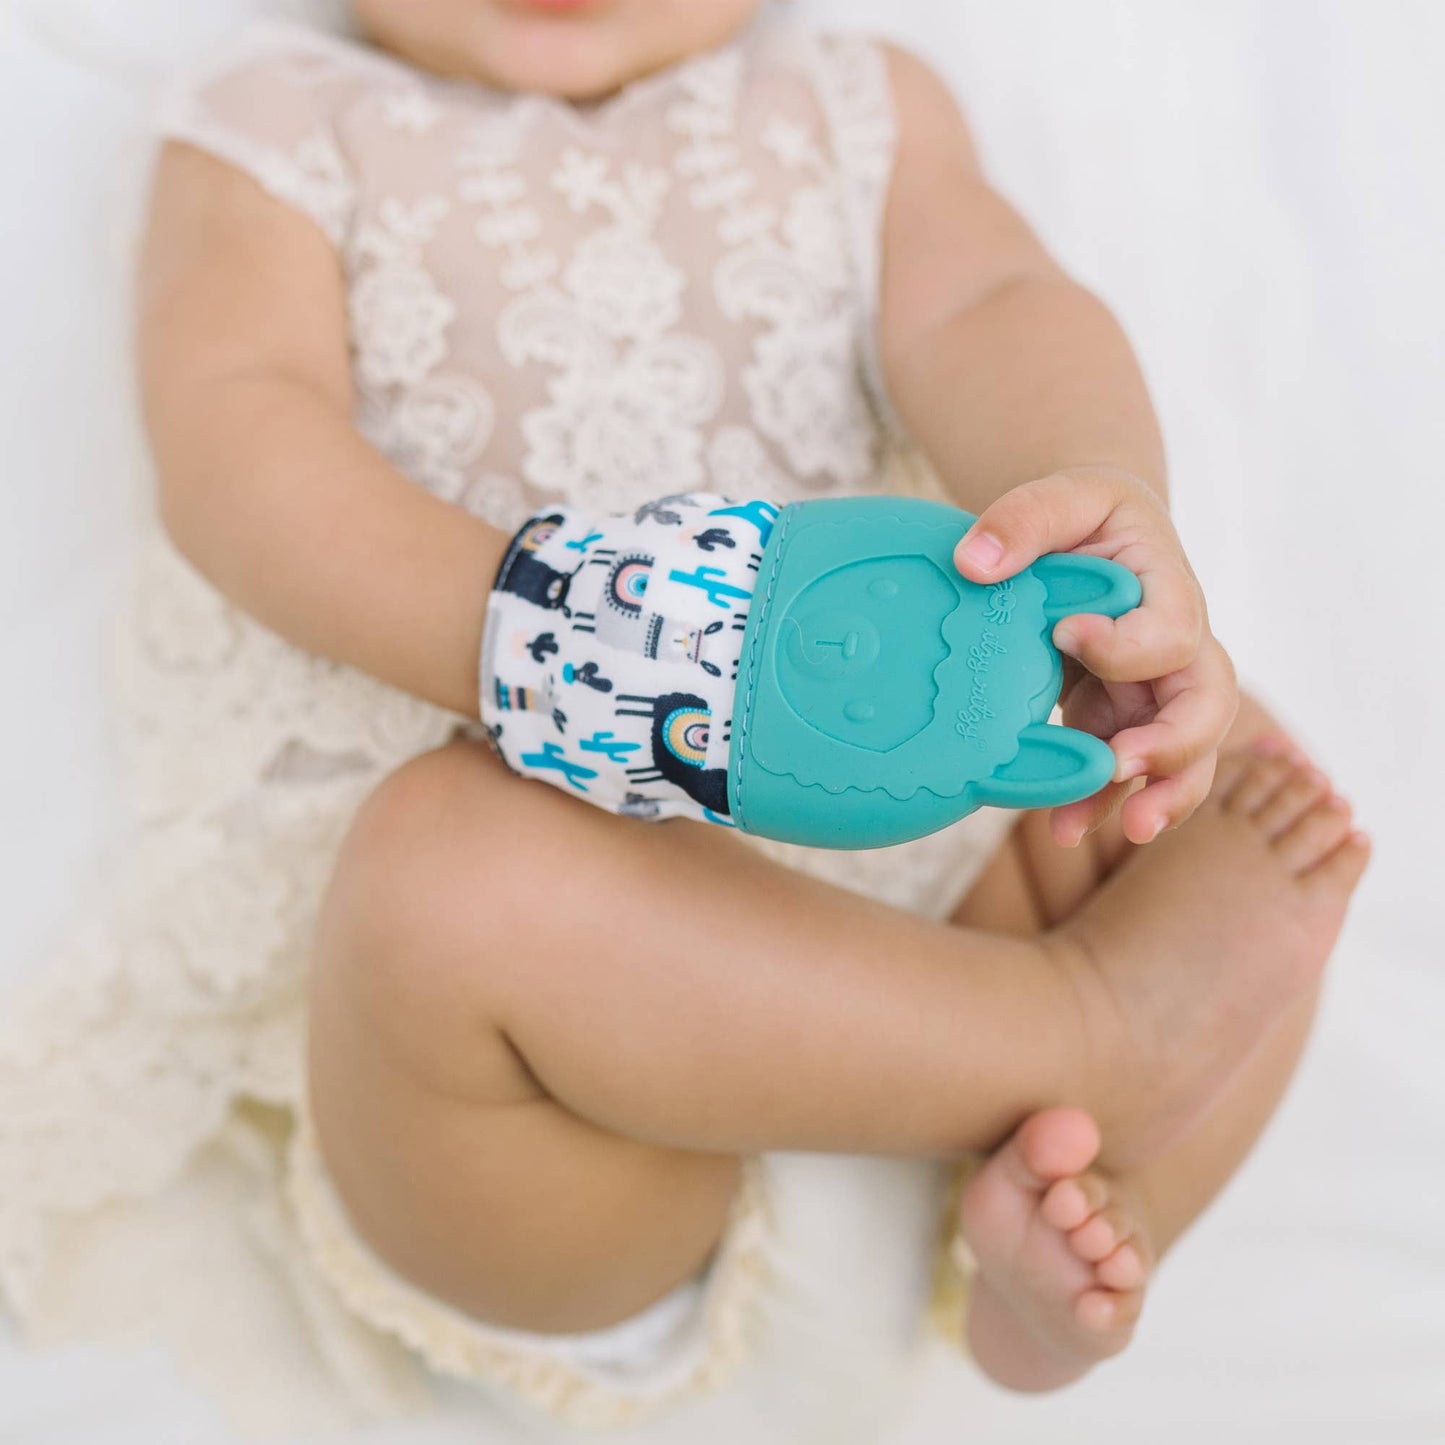 Silicone Teething Mitts  Maple & Co. Boutique   